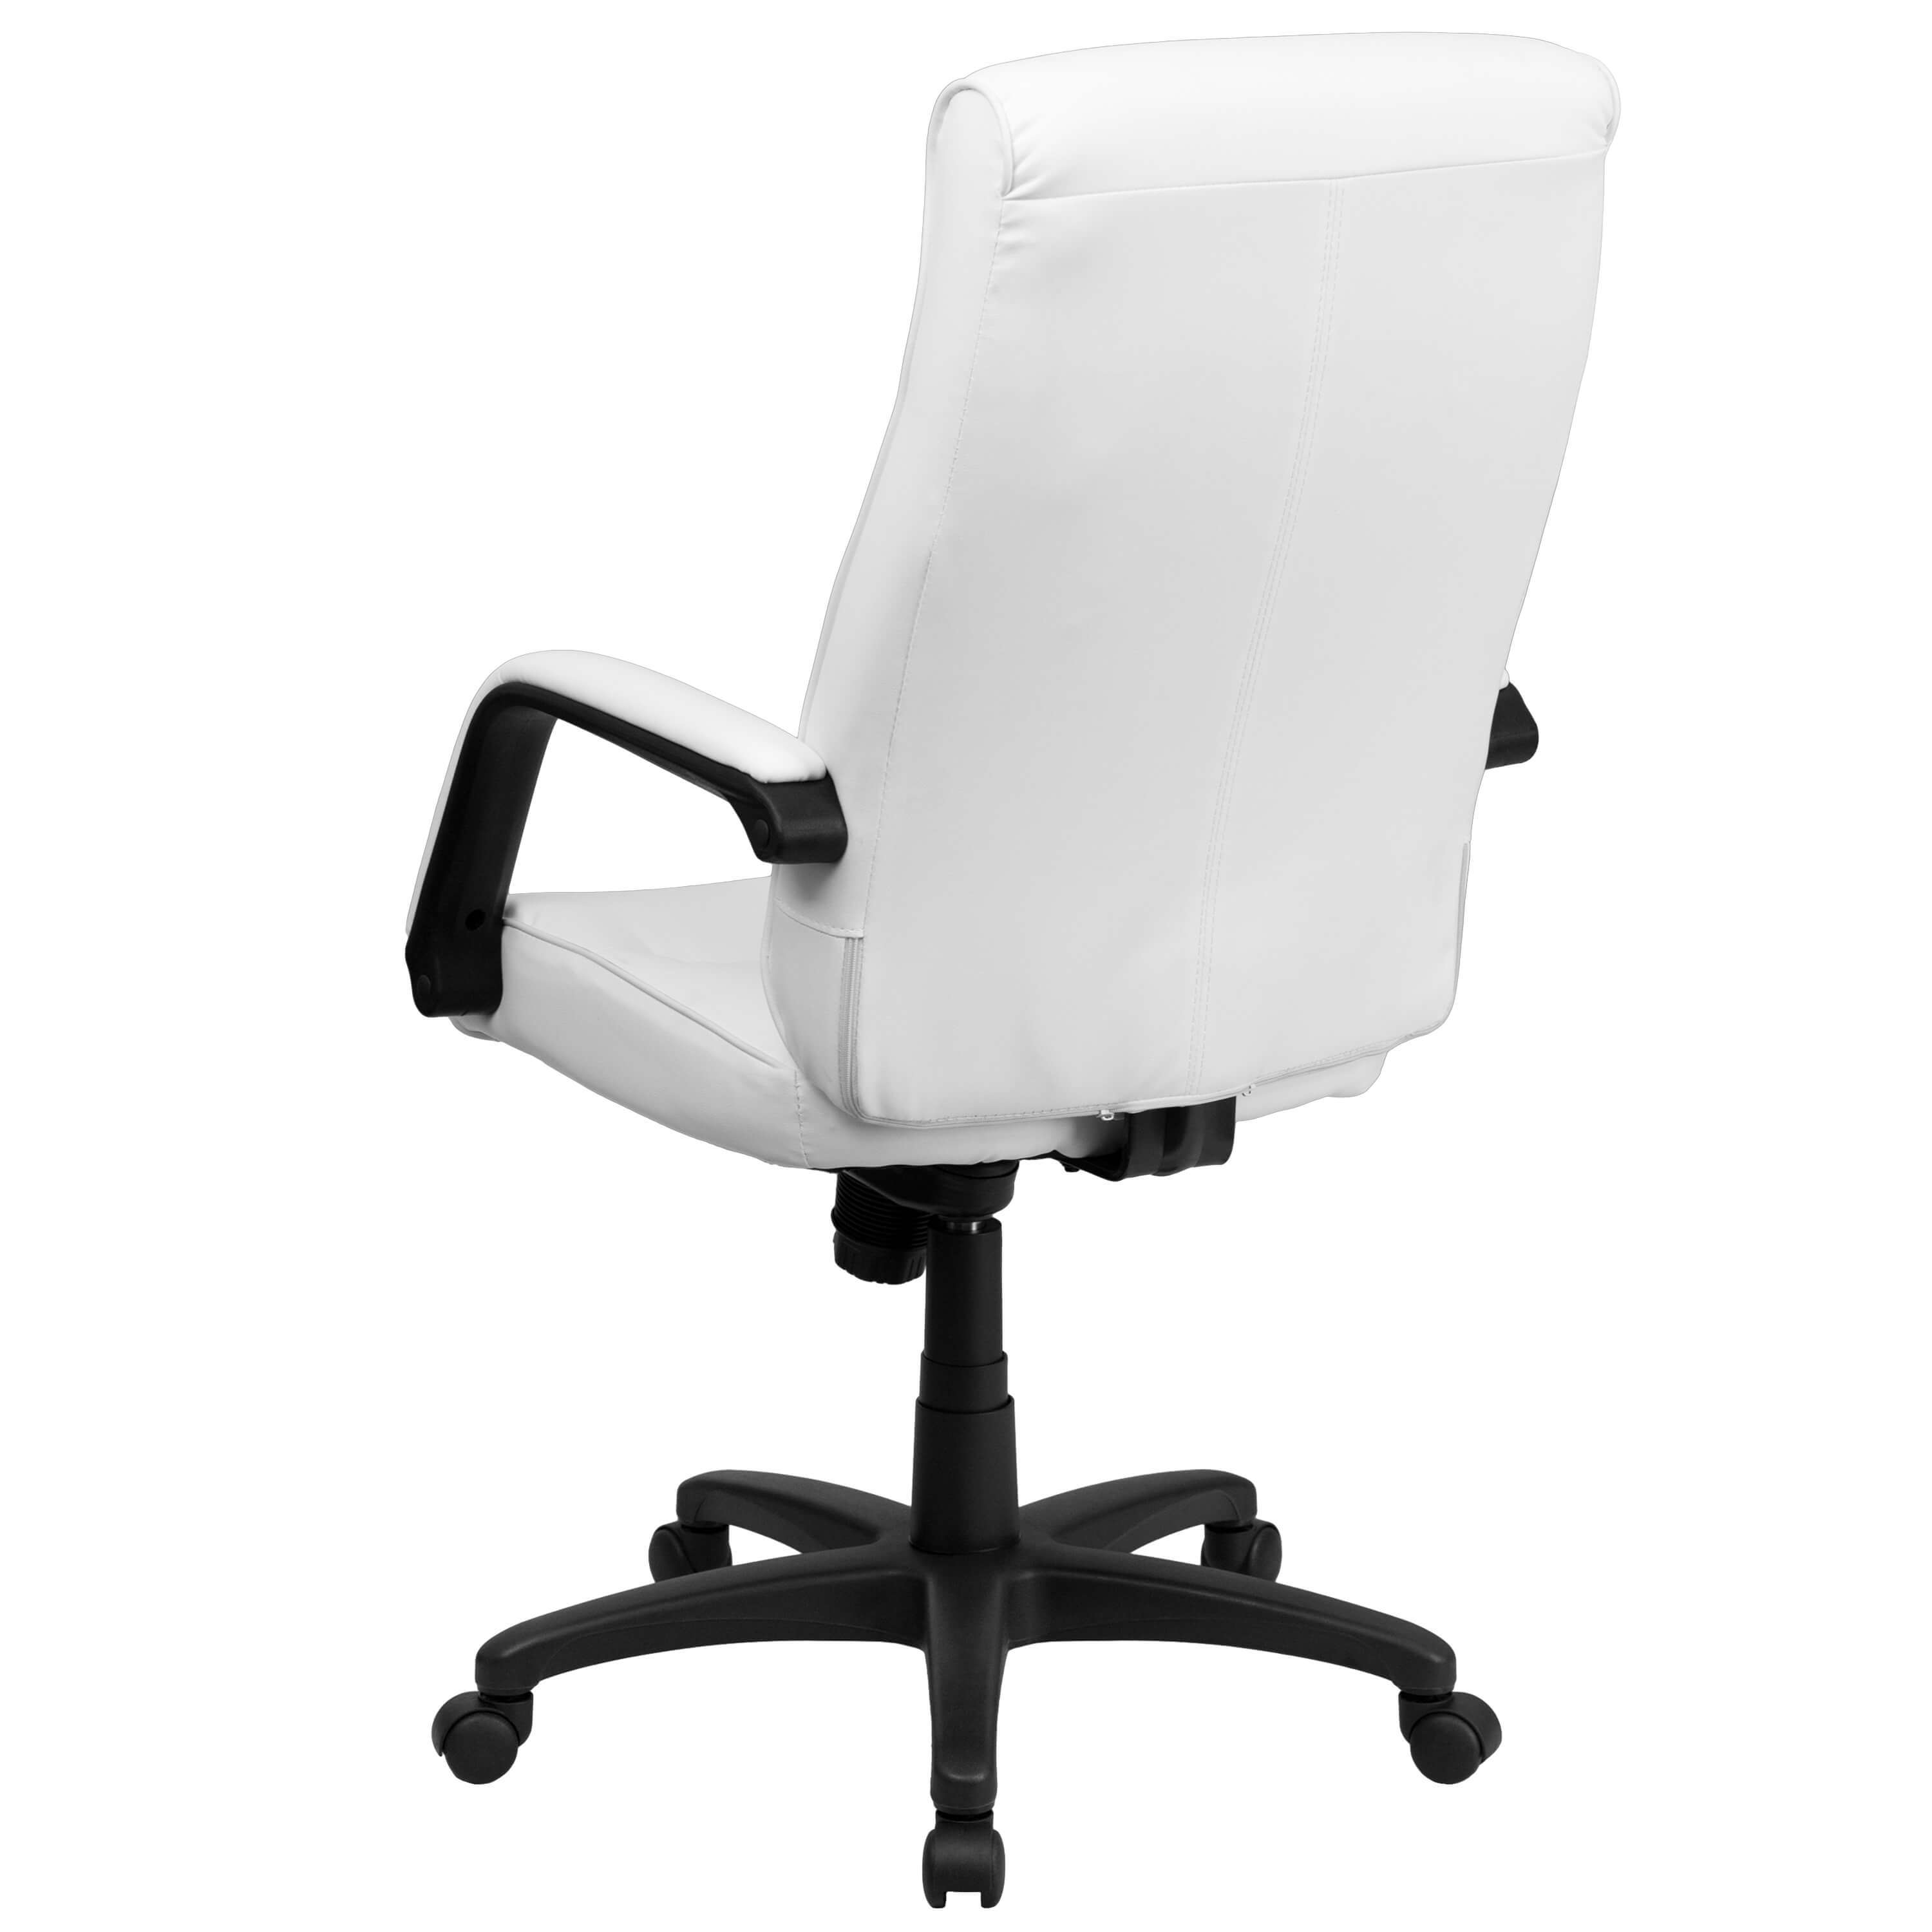 High back office chair rear view